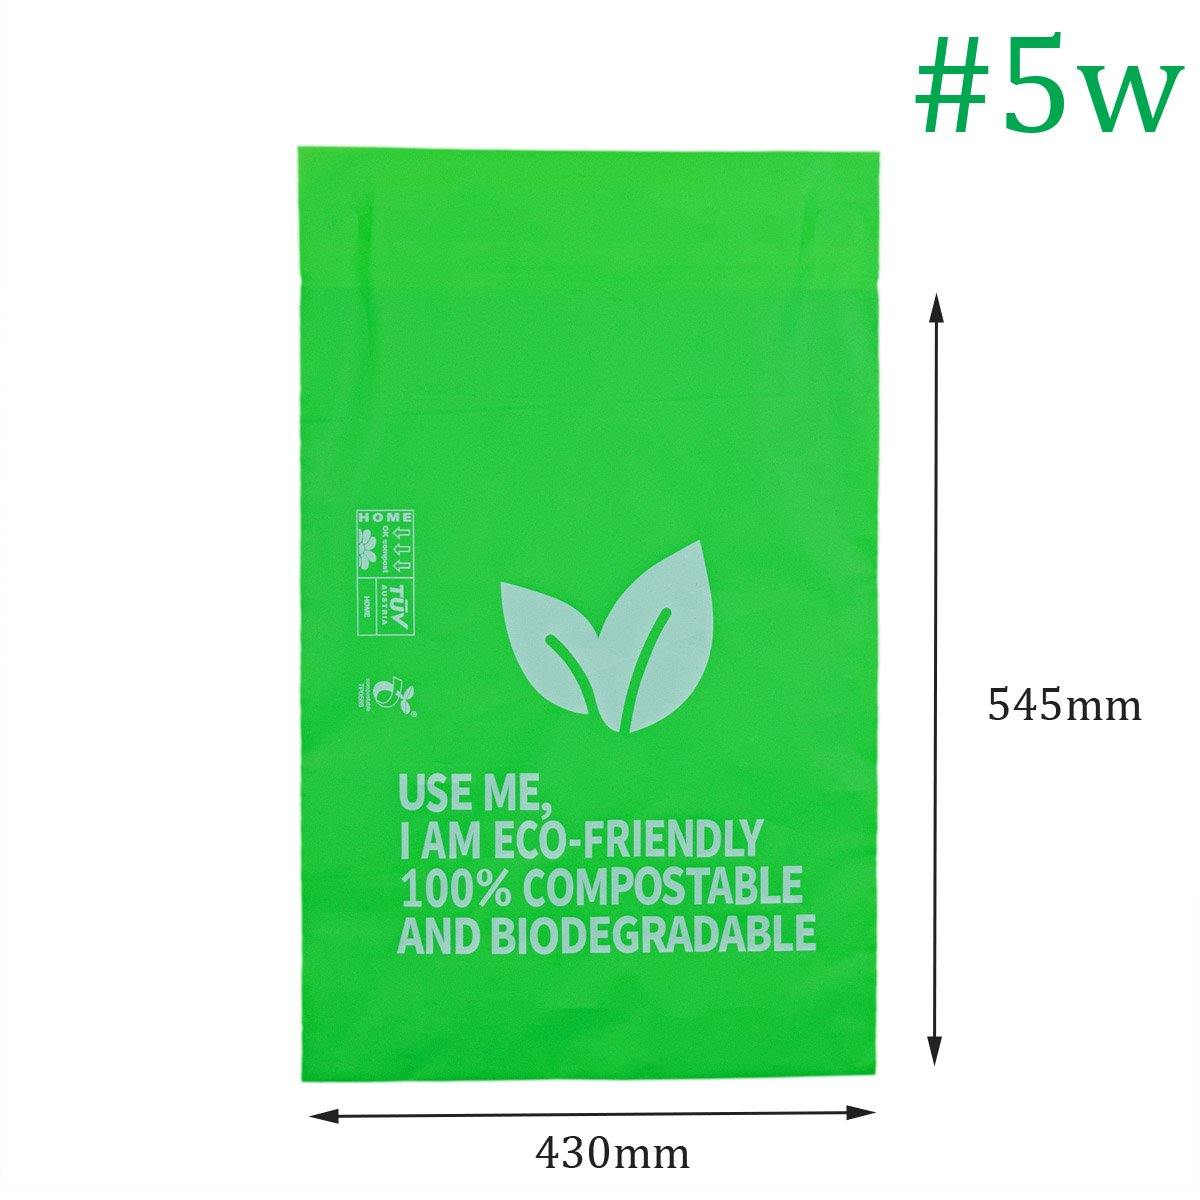 Compostable Mailer 5w 430mm x 545mm